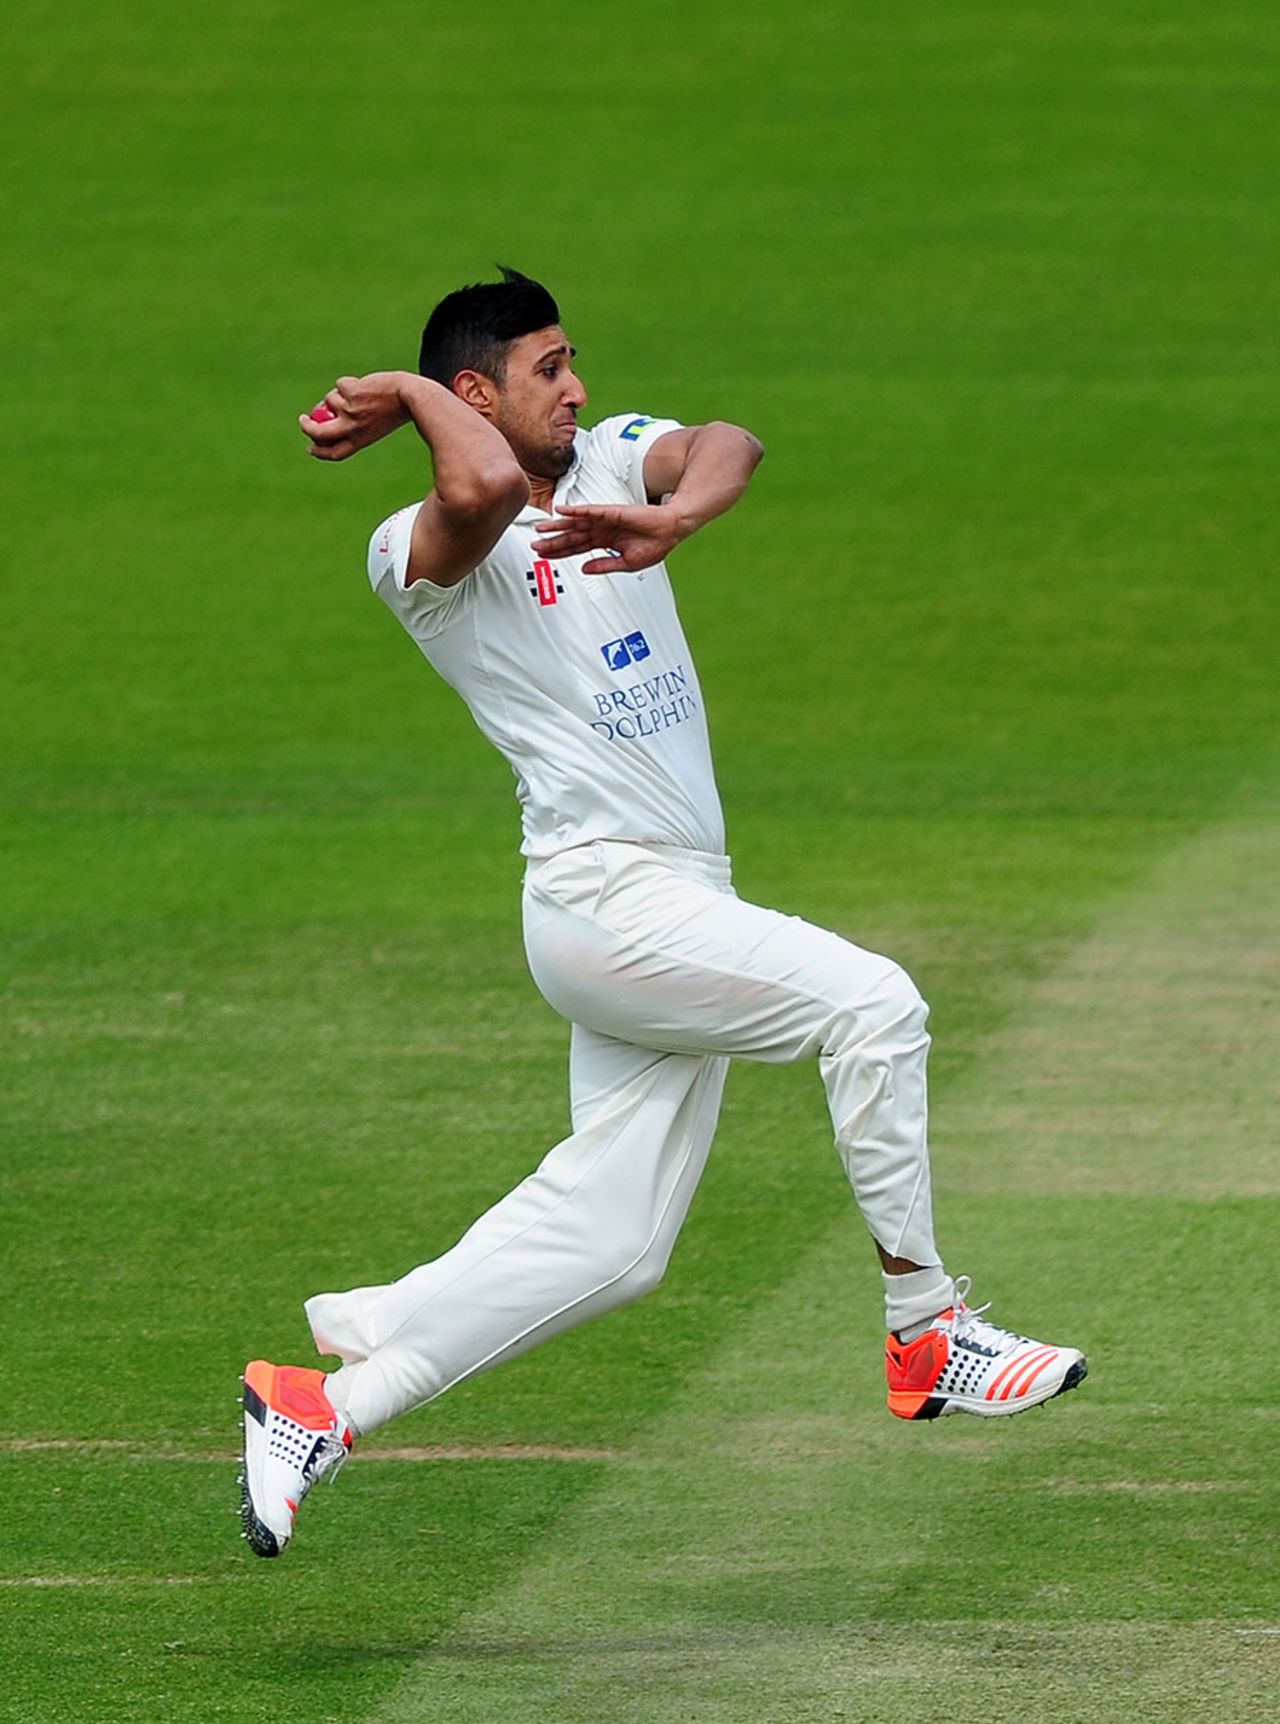 Usman Arshad went wicketless through his first nine overs, Middlesex v Durham, County Championship Division One, Lord's, 1st day, May 2, 2015